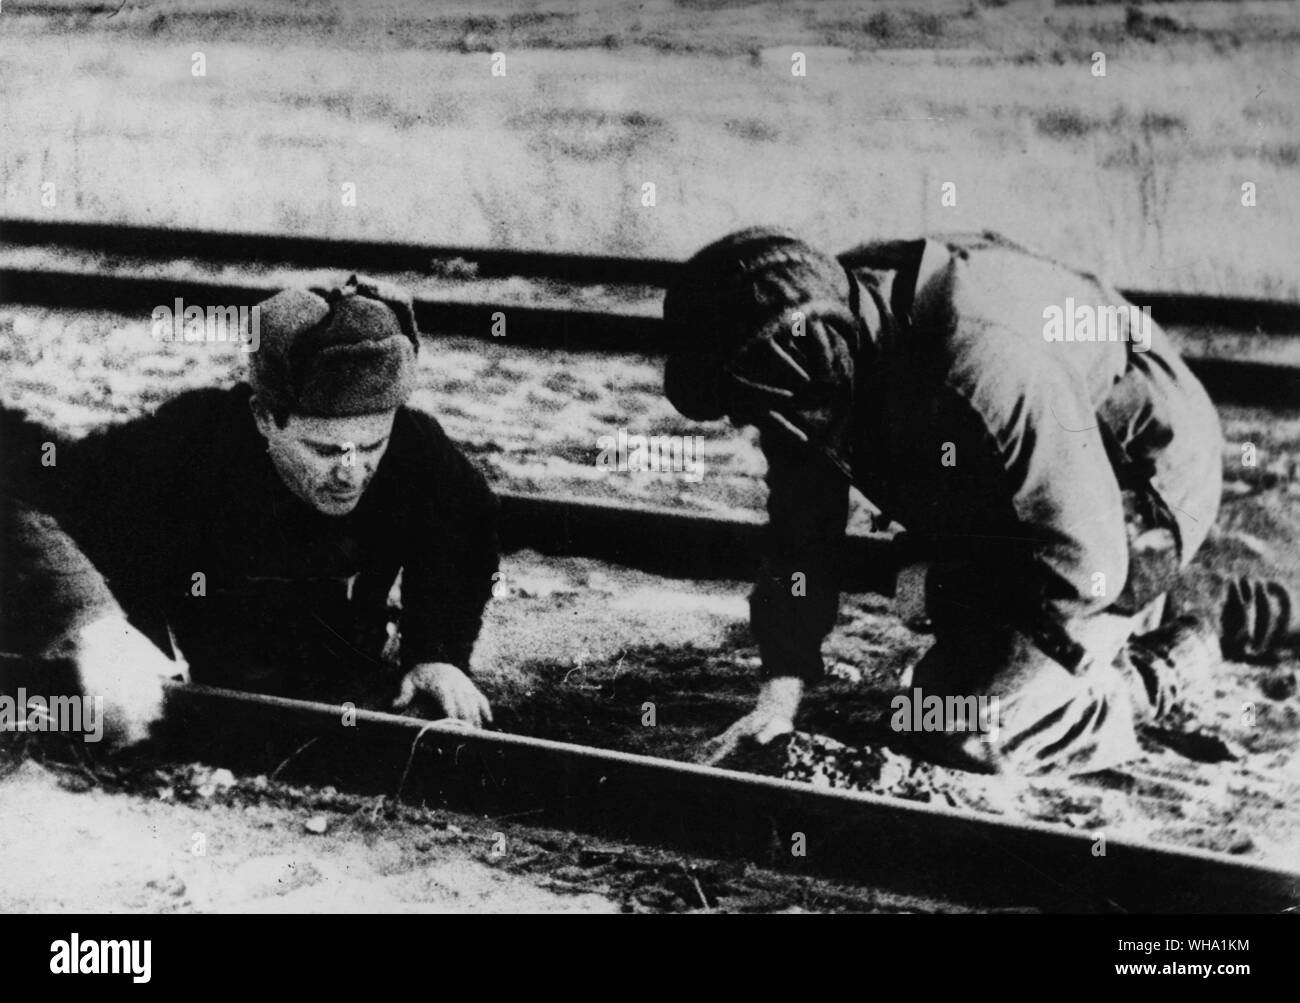 WW2: Belorussian partisans mining a railway track. Mines attached to a railway track. Stock Photo